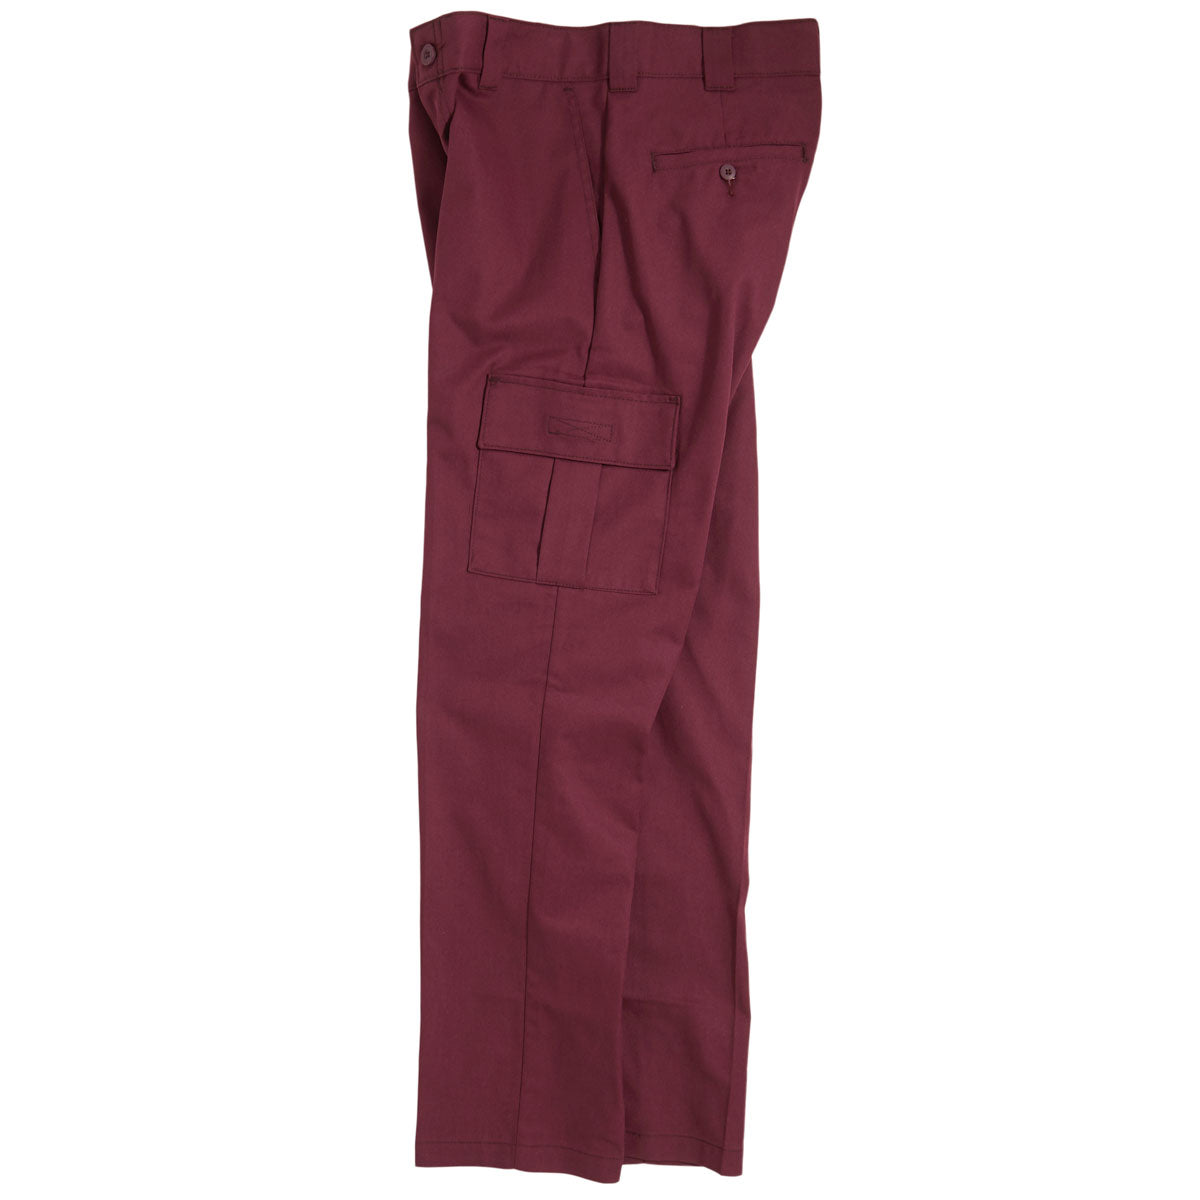 Dickies Regular Fit Contrast Twill Cargo Pants Wine With Dark Contrast Stitch